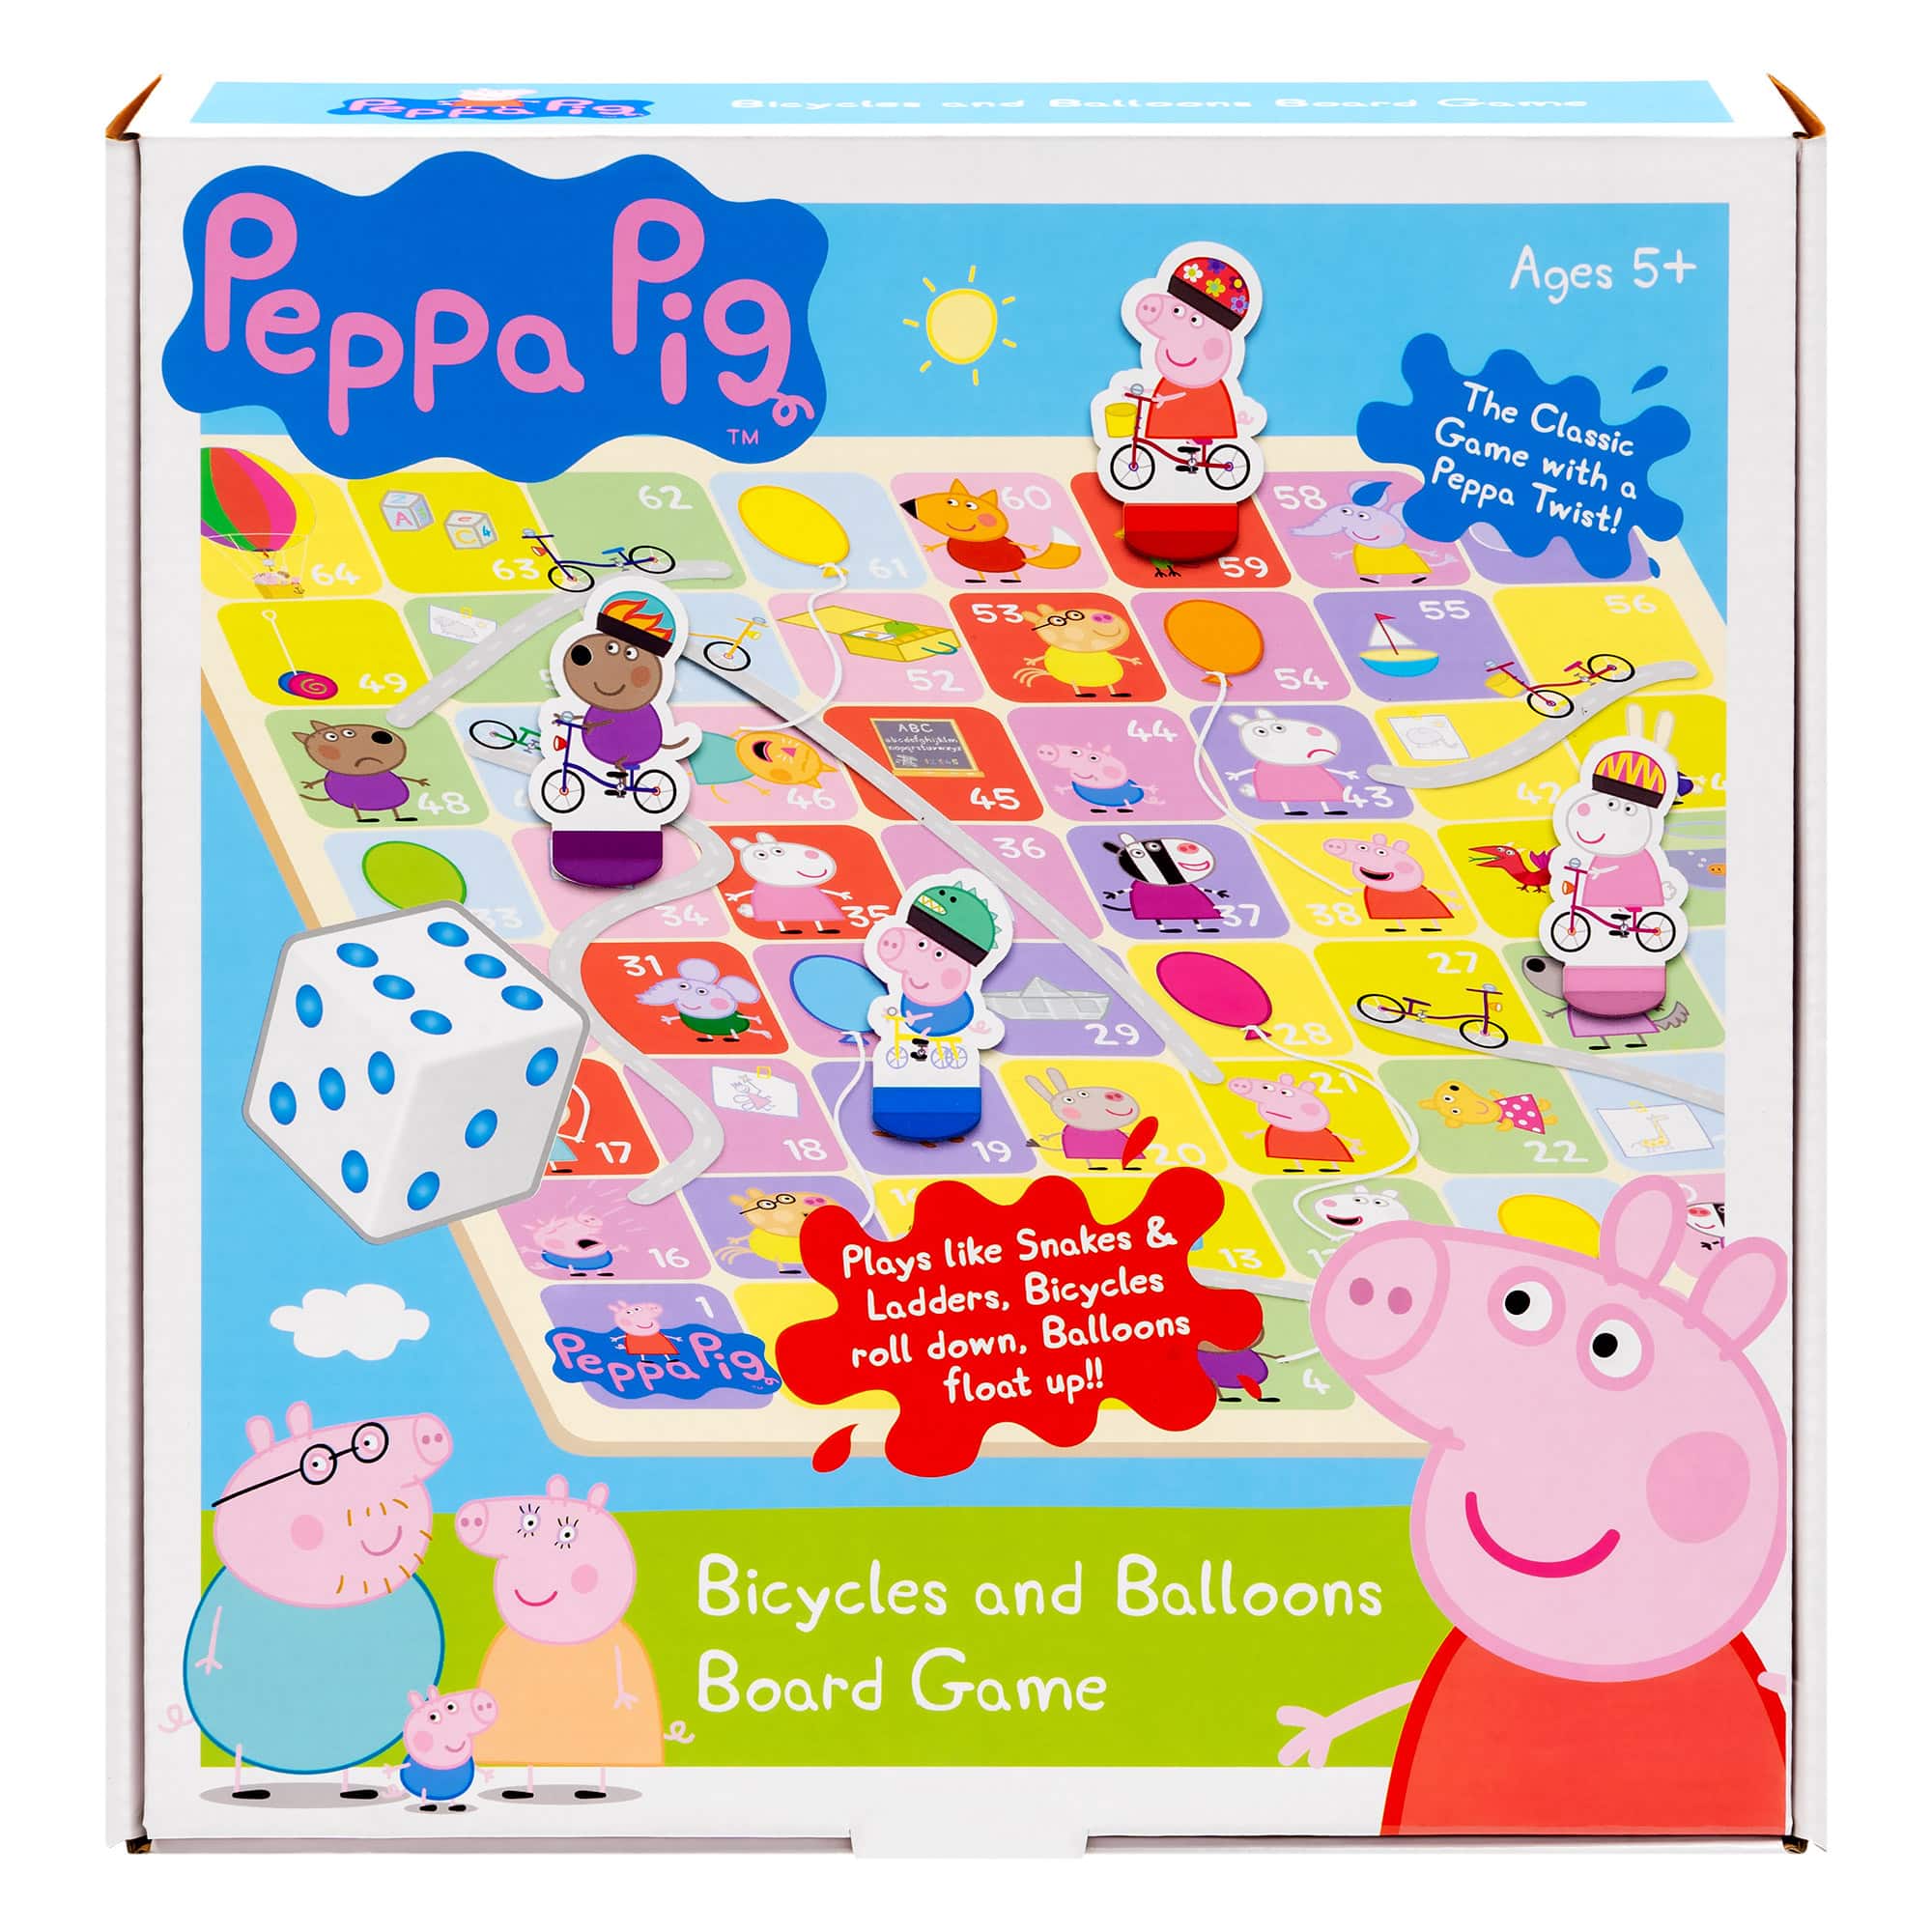 Peppa Pig - Bicycles & Balloons Board Game